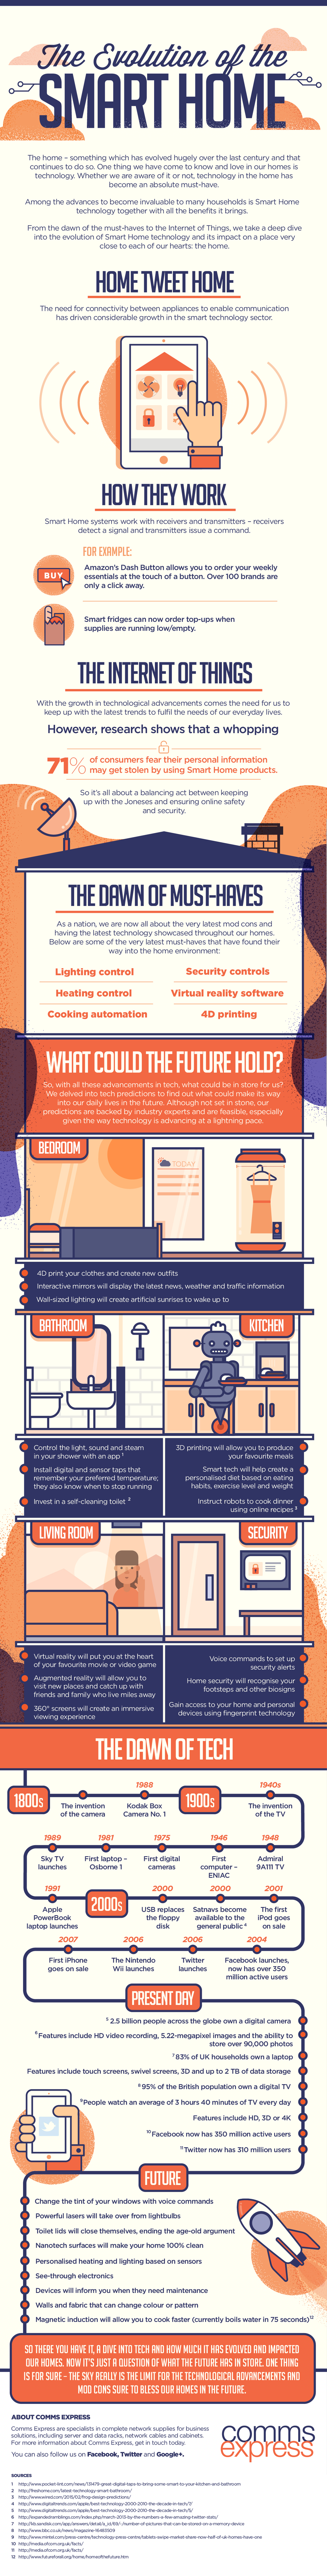 The Evolution of the Smart Home InfoGraphic